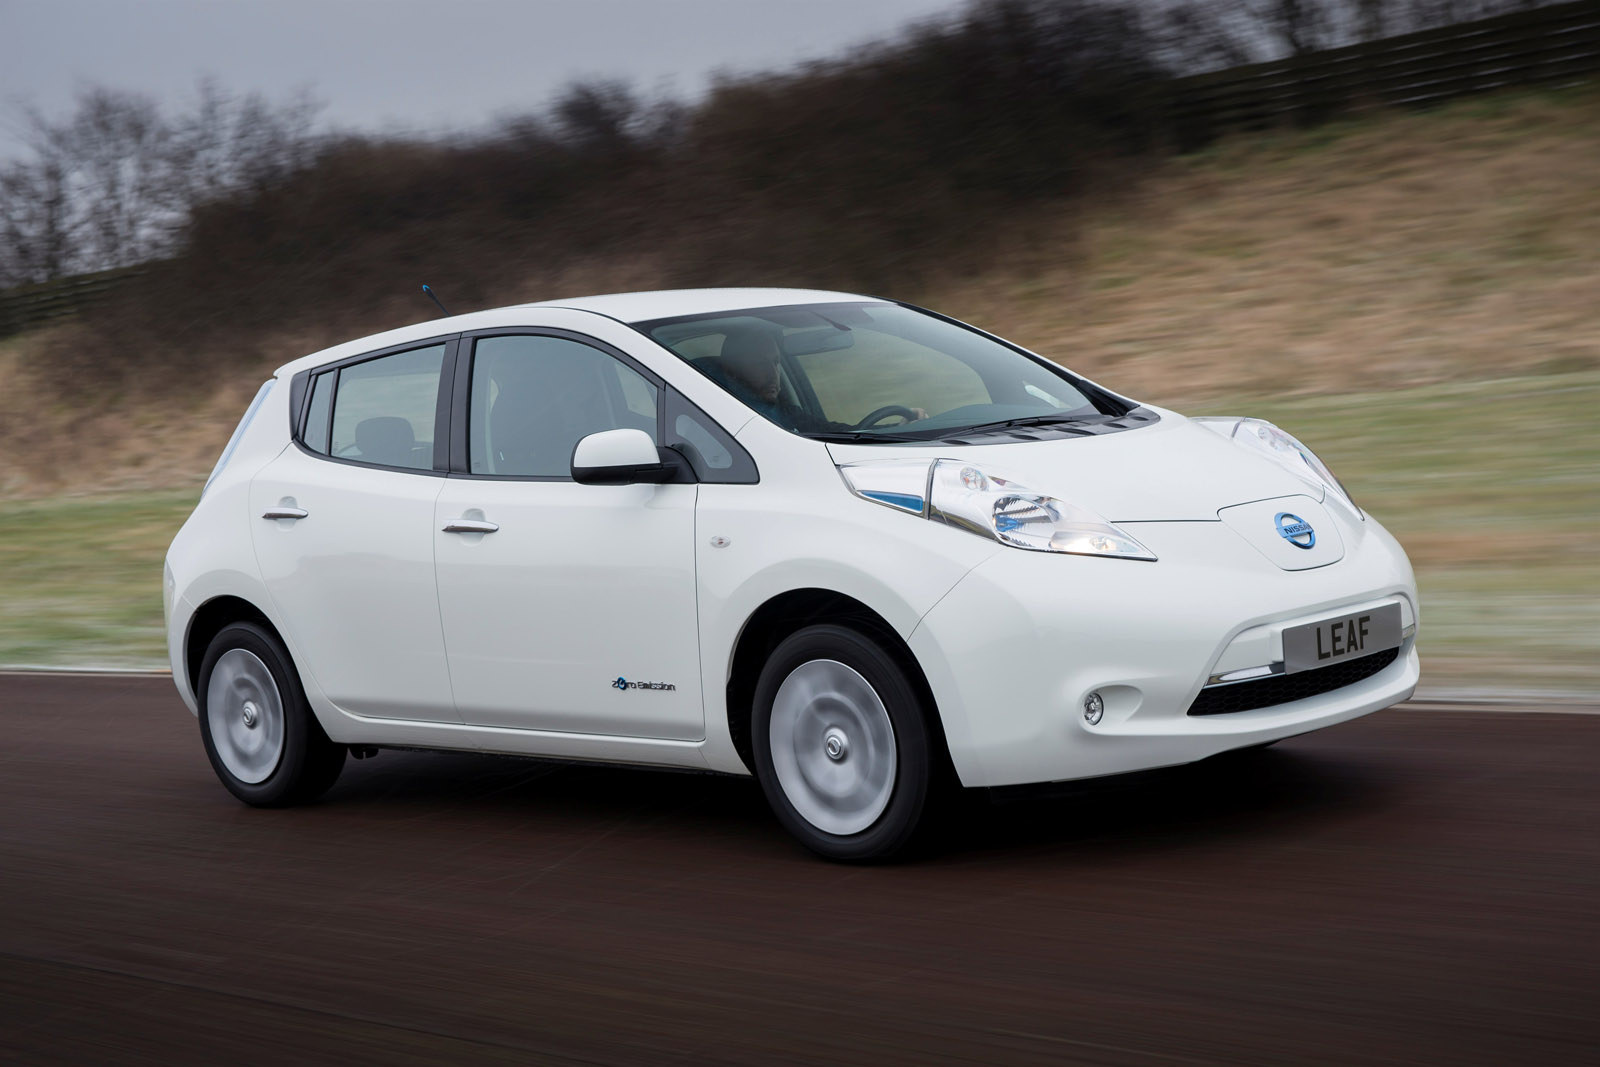 Nissan leaf cost to own #3